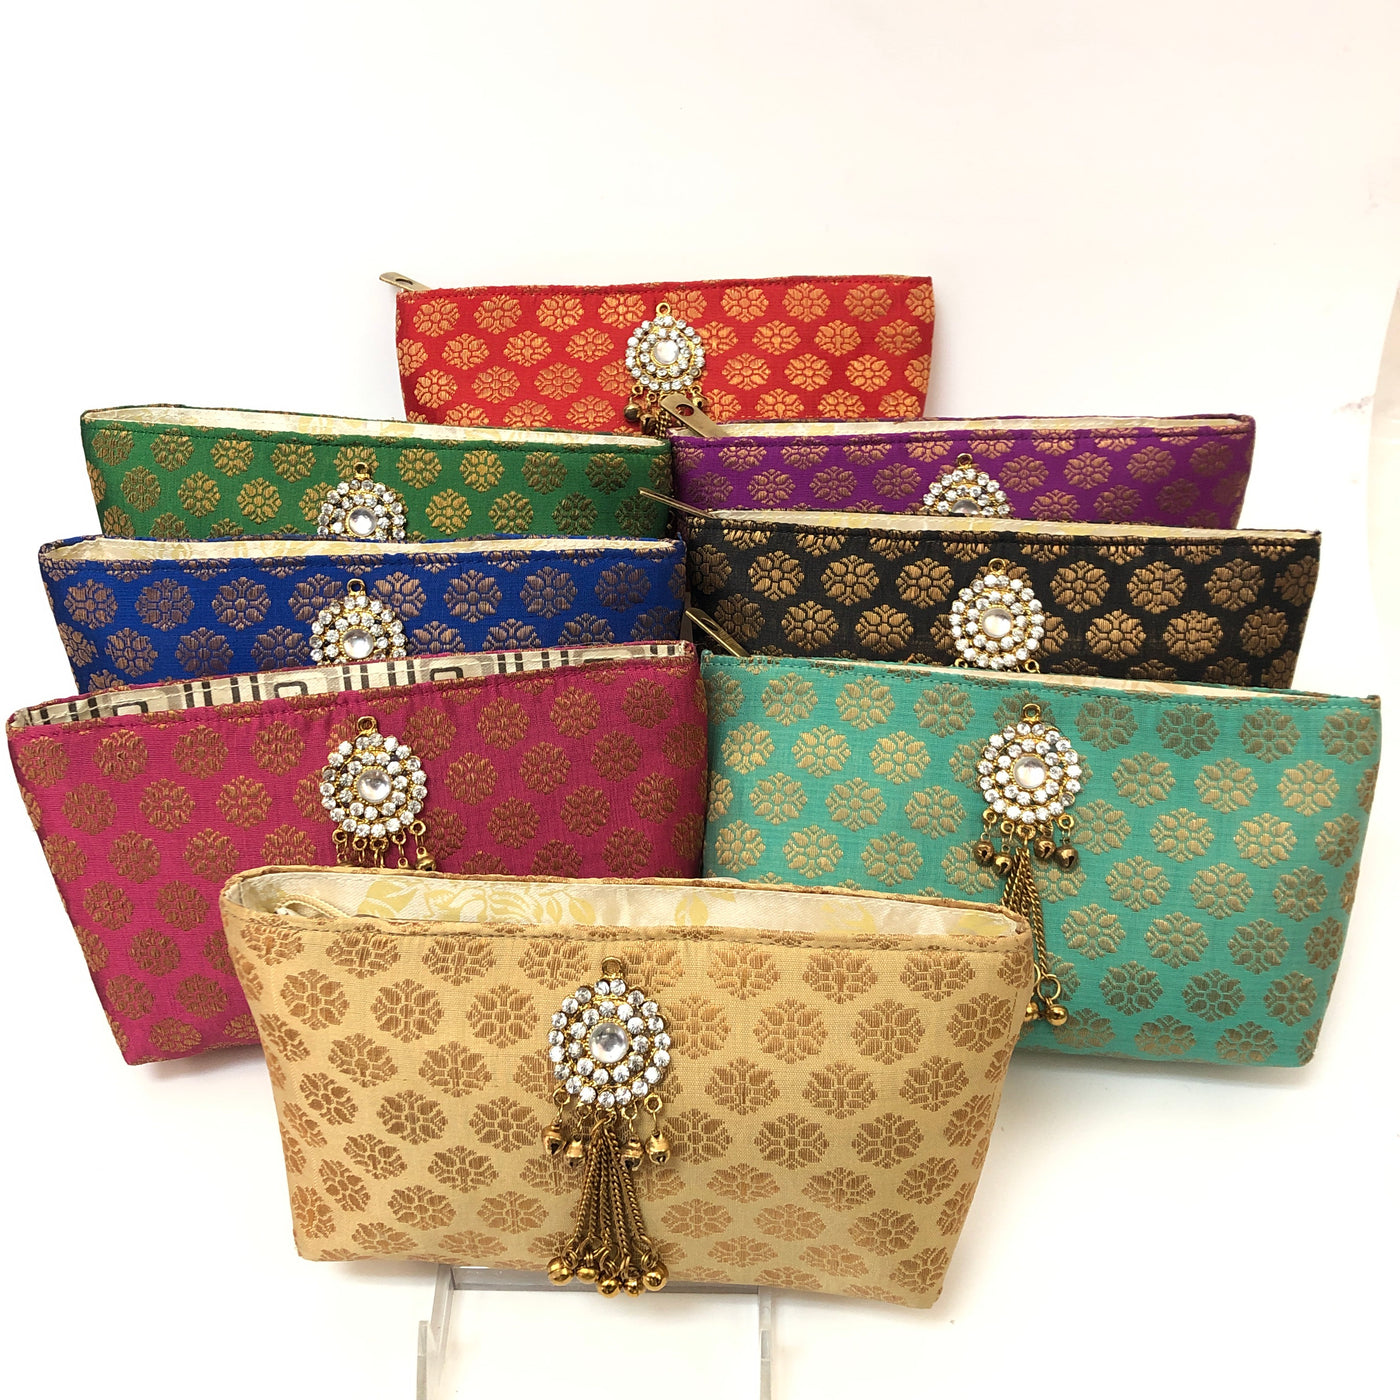 Box Clutch Bags - Ethnic Box Clutch Manufacturer from India